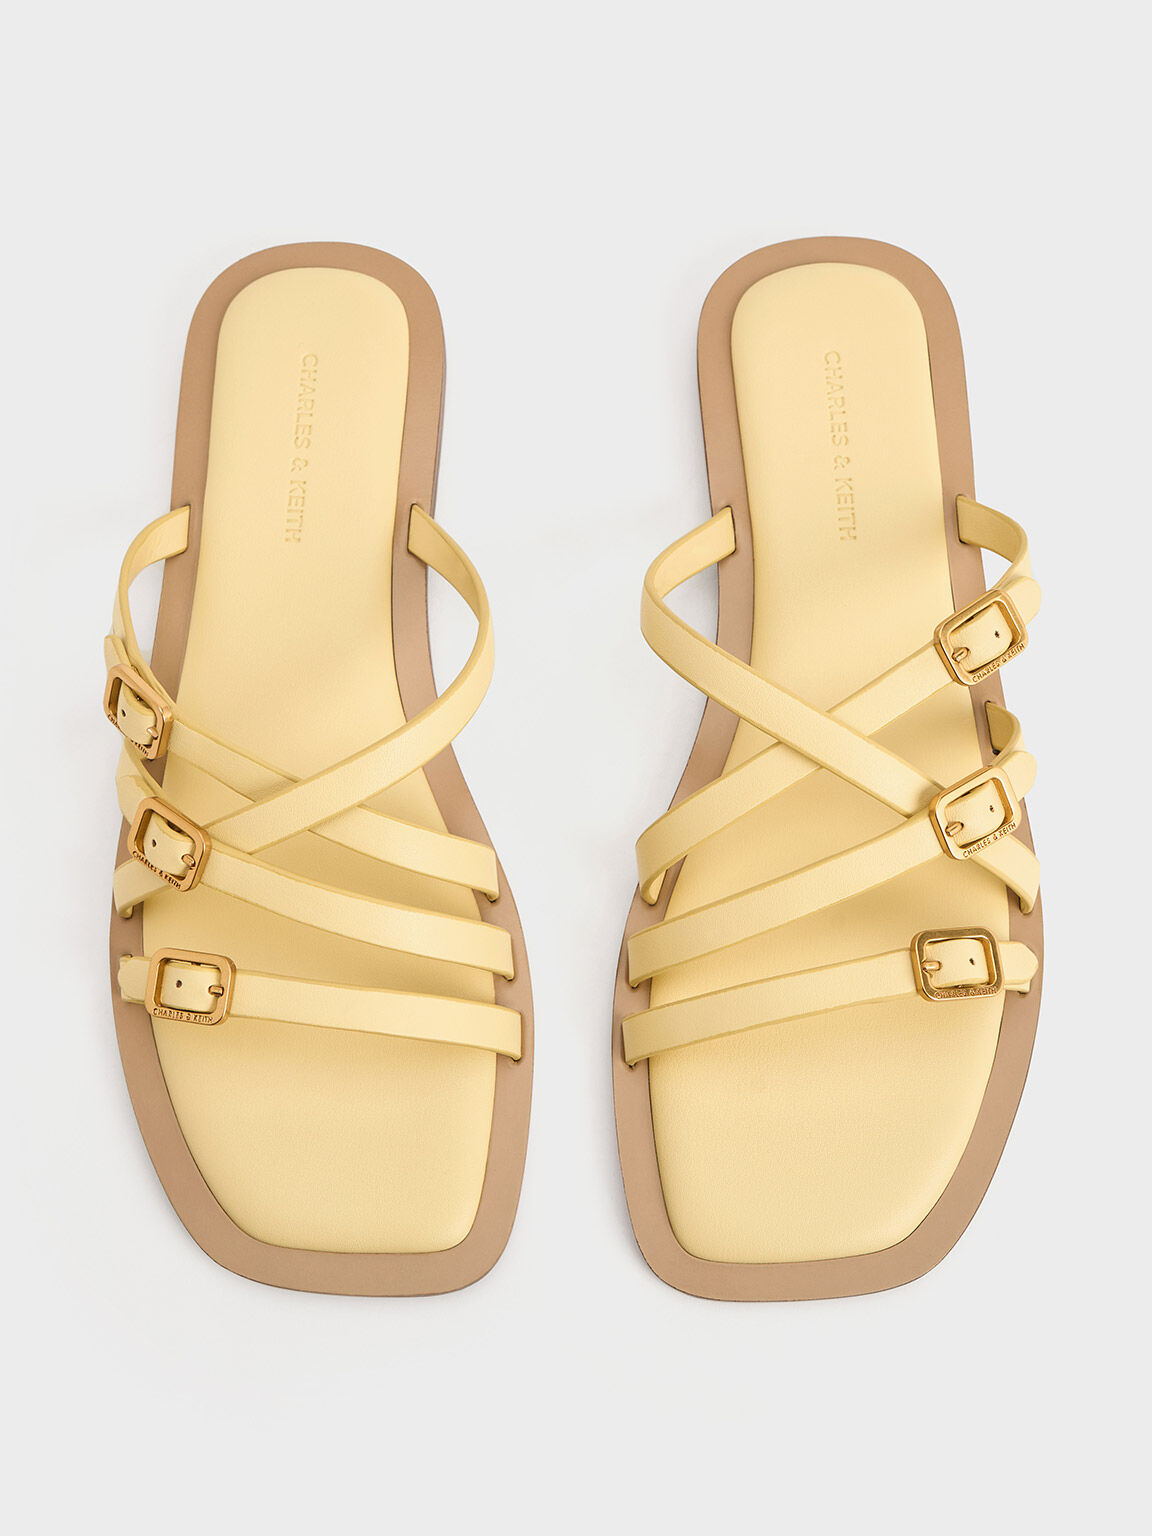 Strappy Buckled Slide Sandals, Yellow, hi-res